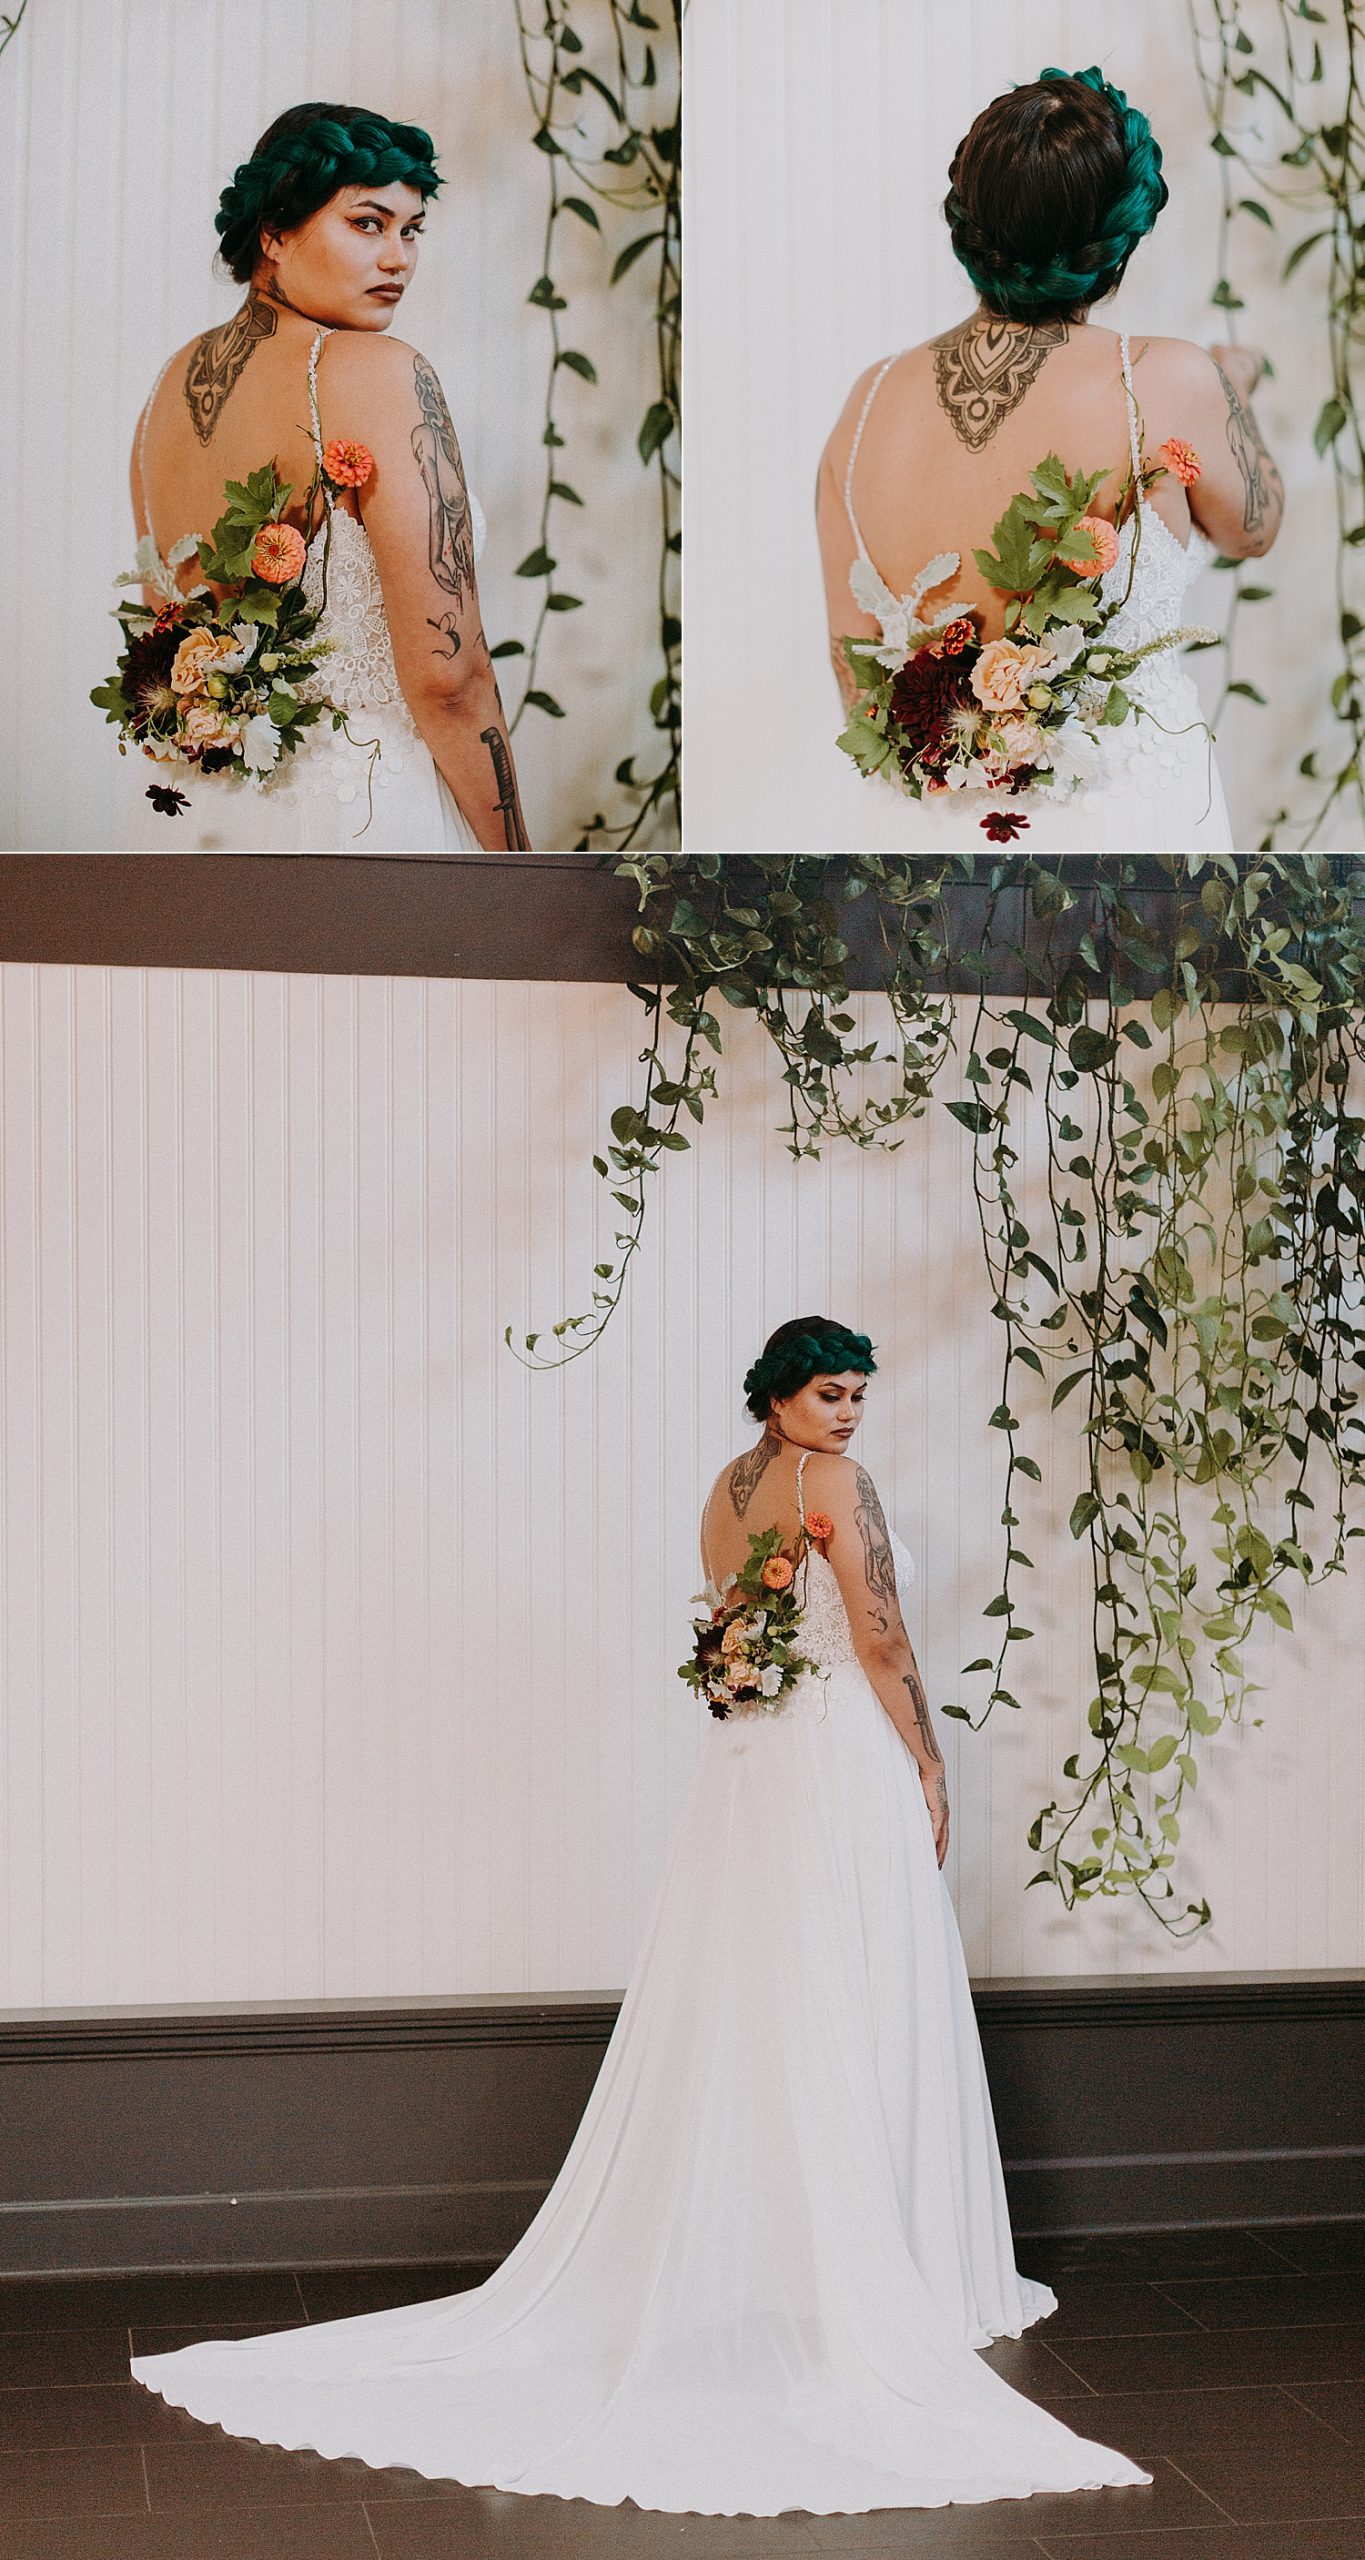 edgy tattoo green haired bride portrait on her wedding day by marcela pulido photography portland wedding photographer